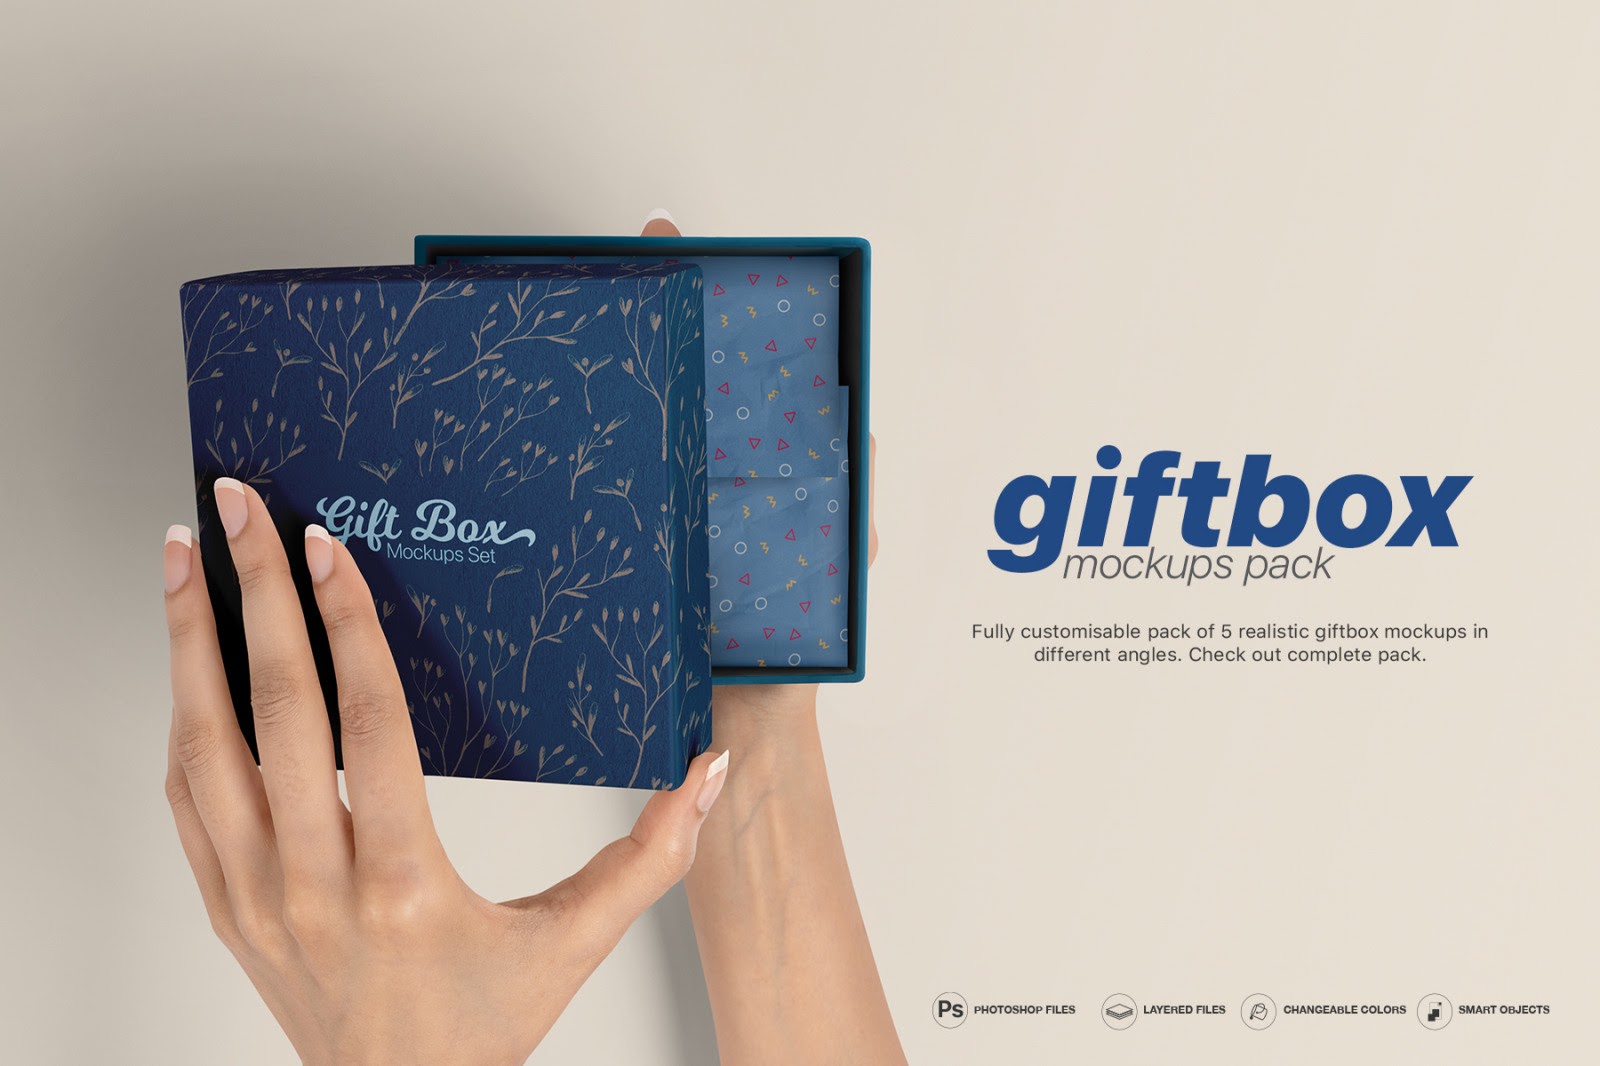 Download Book Mockup Free Photoshop Yellowimages - Gift Box Mockups Pack In Packaging Mockups On ...